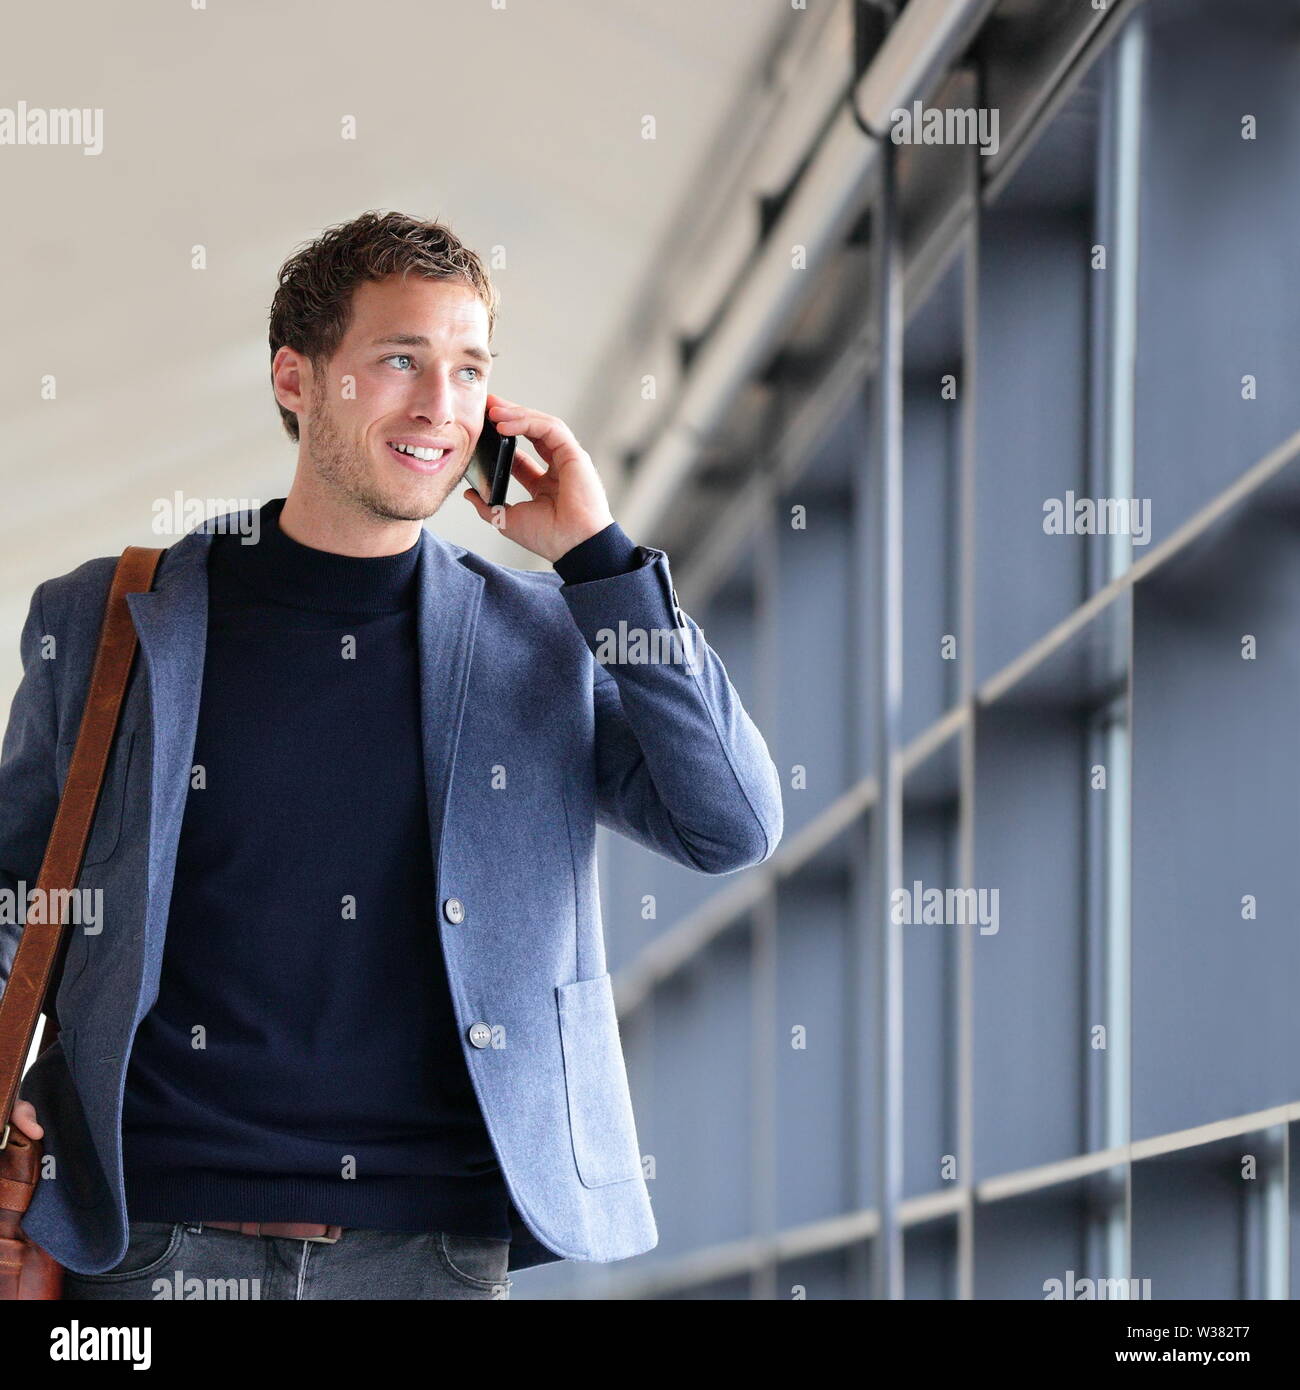 Urban business man talking on smart phone traveling walking in full body length inside in airport. Casual young businessman wearing suit jacket and shoulder bag. Handsome male model in his 20s. Stock Photo